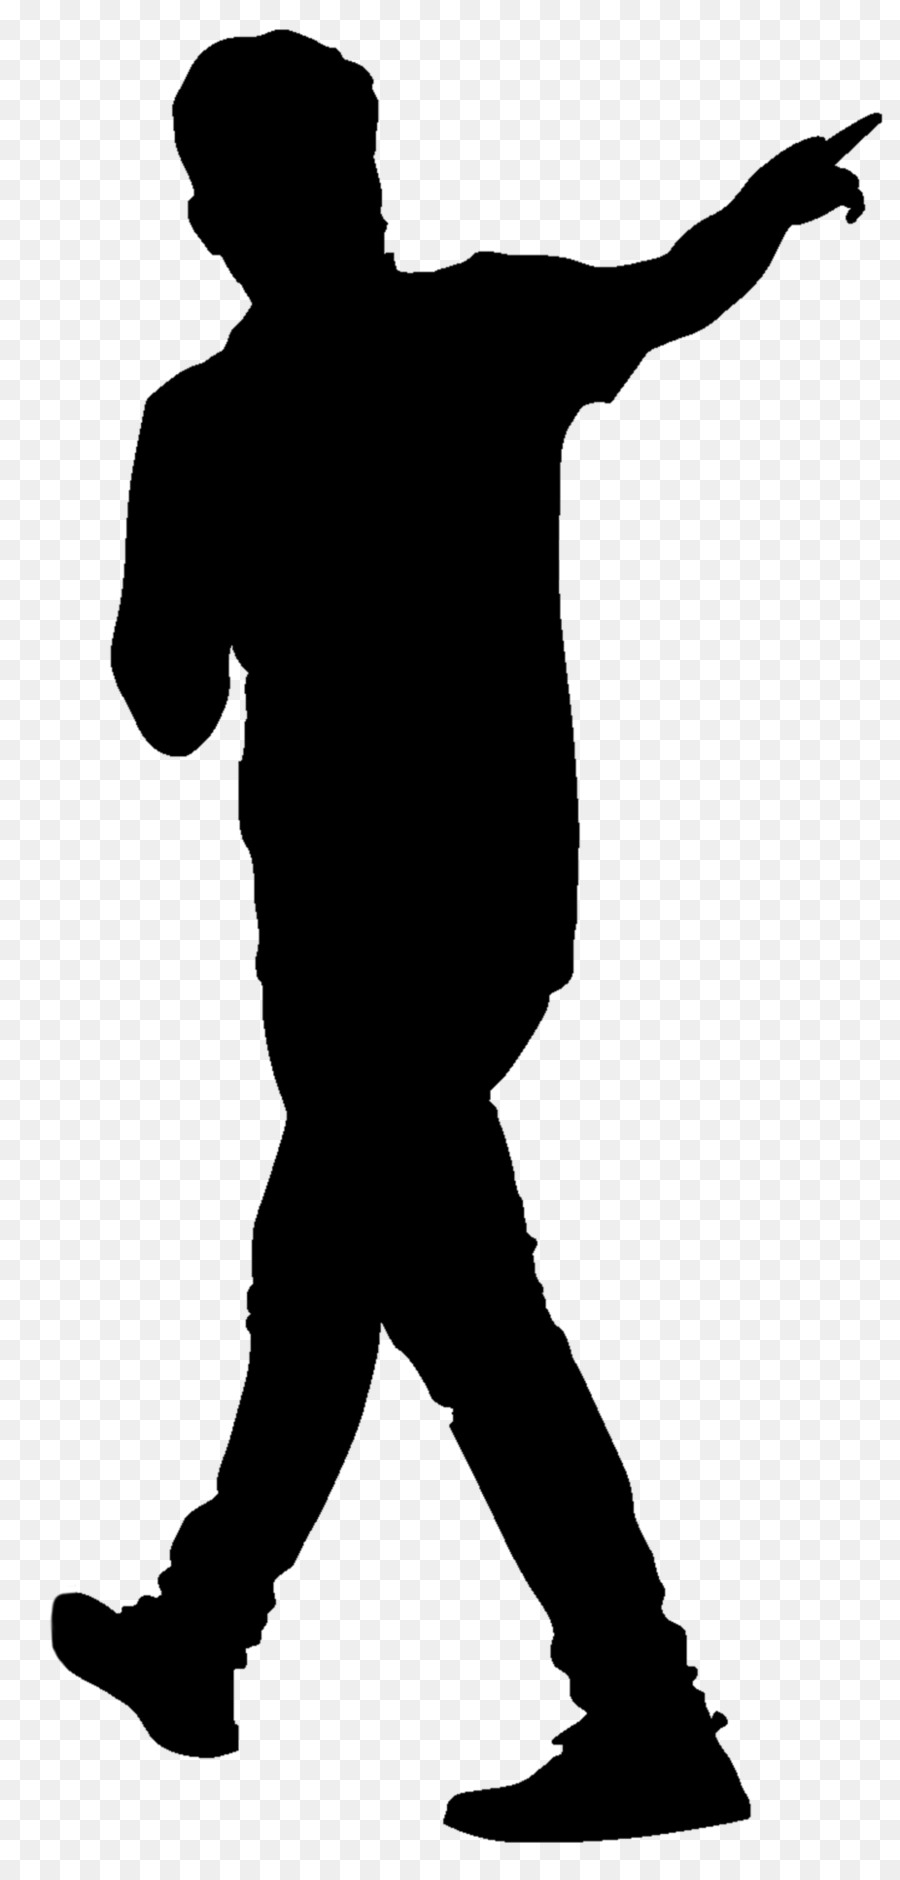 Silhouette Soldier Illustration Vector graphics Clip art -  png download - 926*1920 - Free Transparent Silhouette png Download.